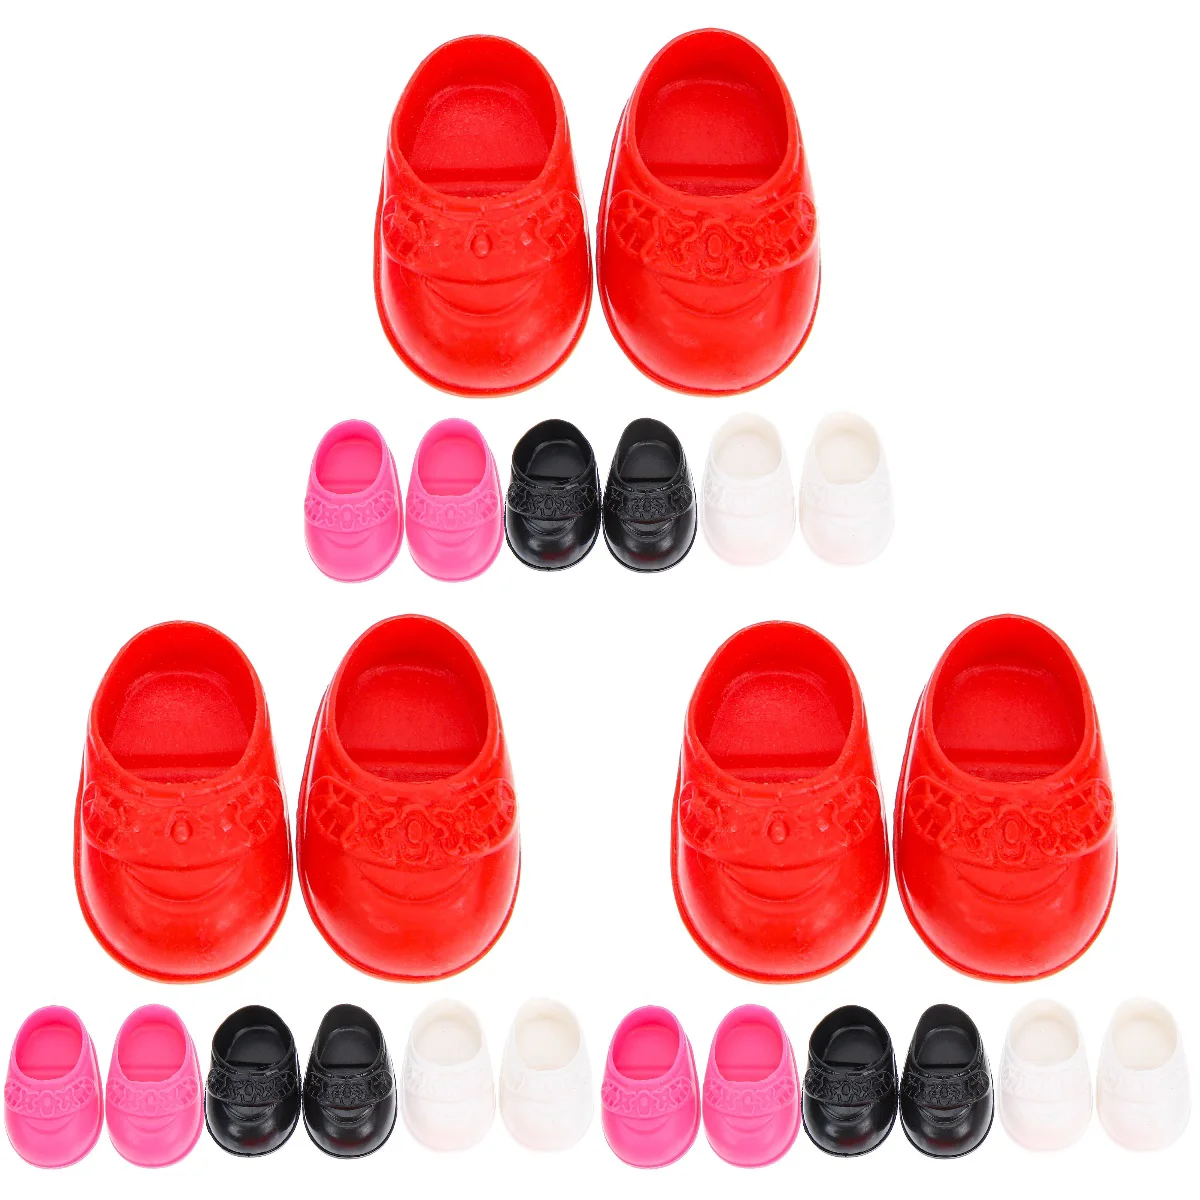 

12 Pairs Flat Shoes Mini Toy Miniature Trendy Accessories Dolls House Decor Models Black Boots Kids Playset Tiny